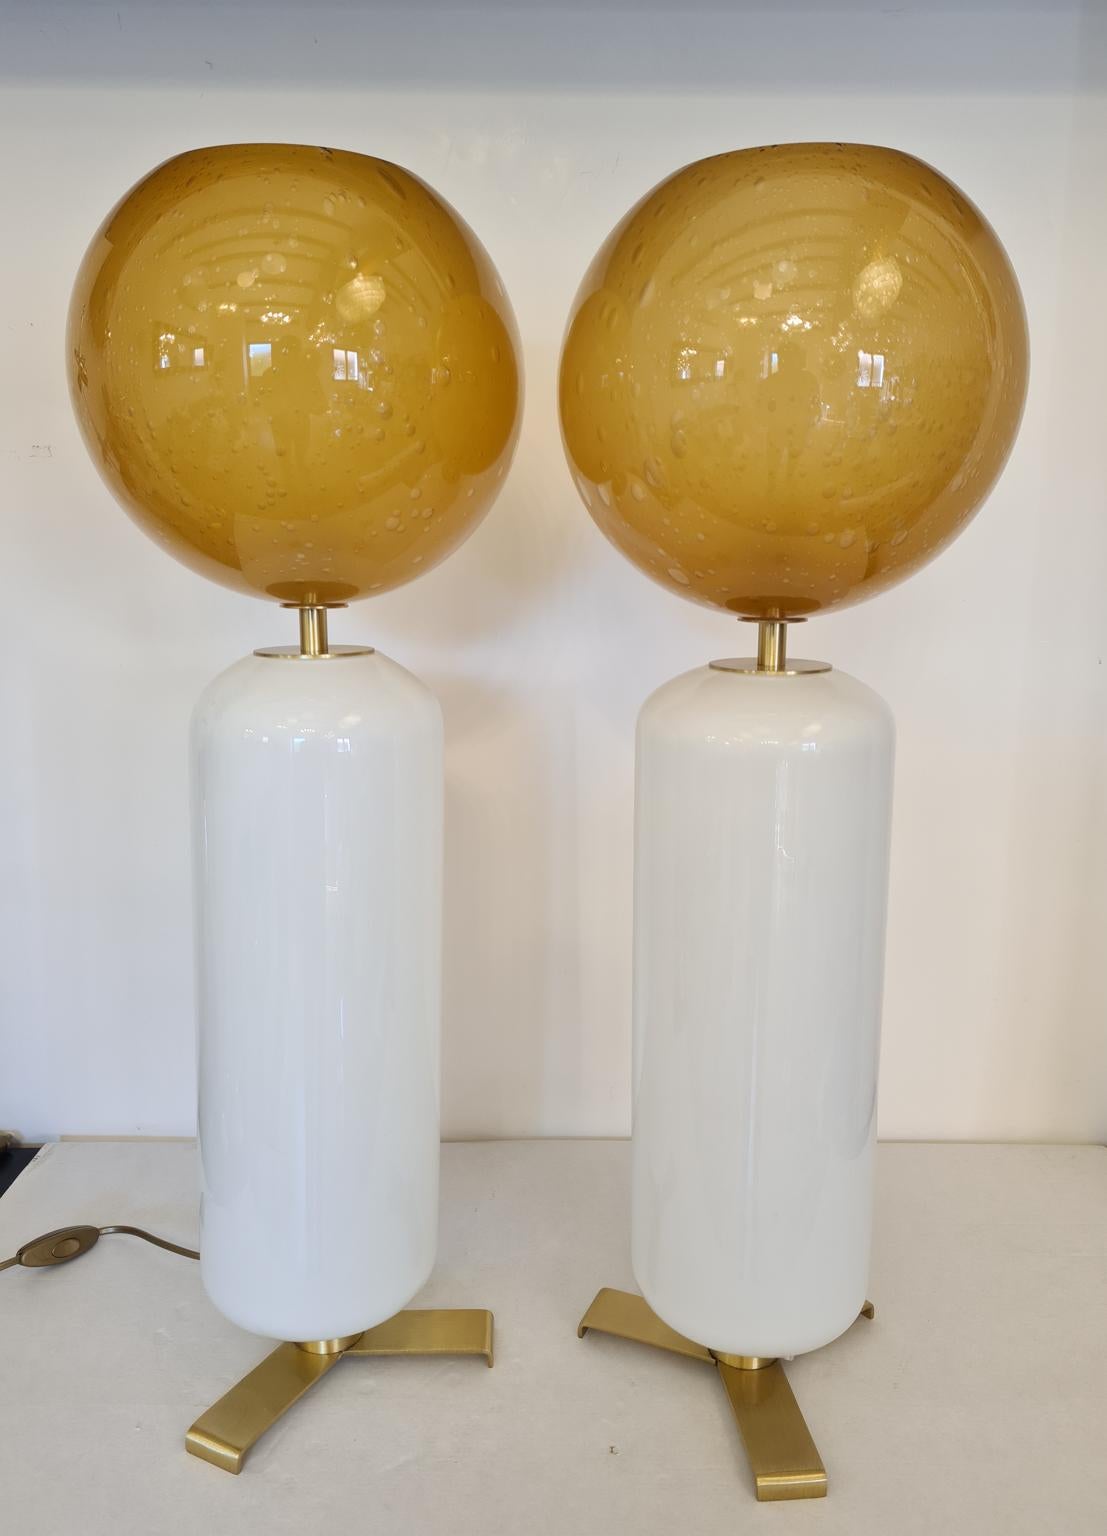 Exclusive pair of Murano glass table lamps white color with pulegoso amber upper sphere.
Pulegoso processing are bubbles inside the color.
Lamp made with great care and precision by our master glassmaker Alberto Donà of Murano
The products are